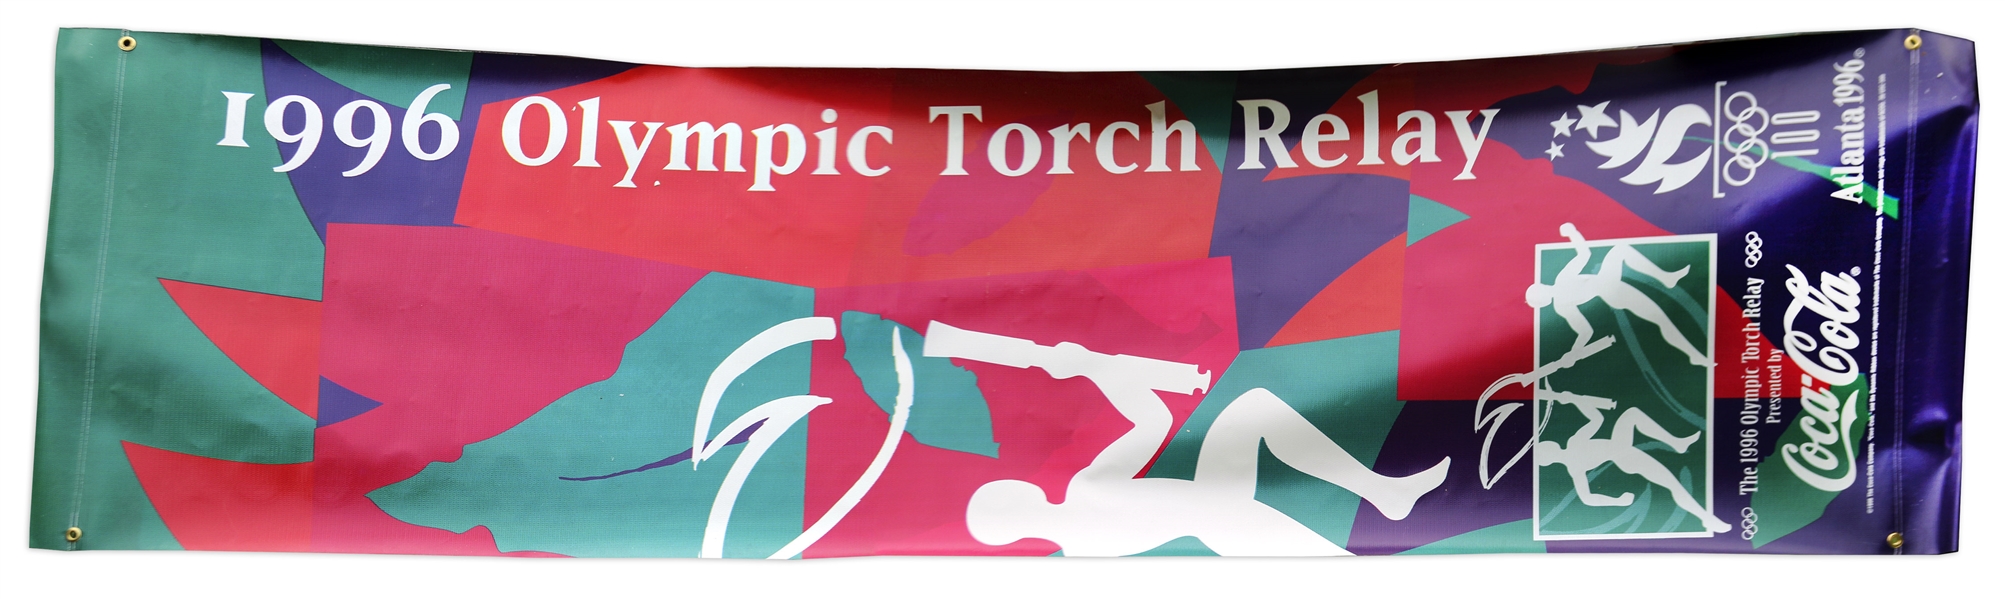 Olympic Torch From the 1996 Olympic Games Held in Atlanta, Georgia -- Includes Original Banner From The Relay